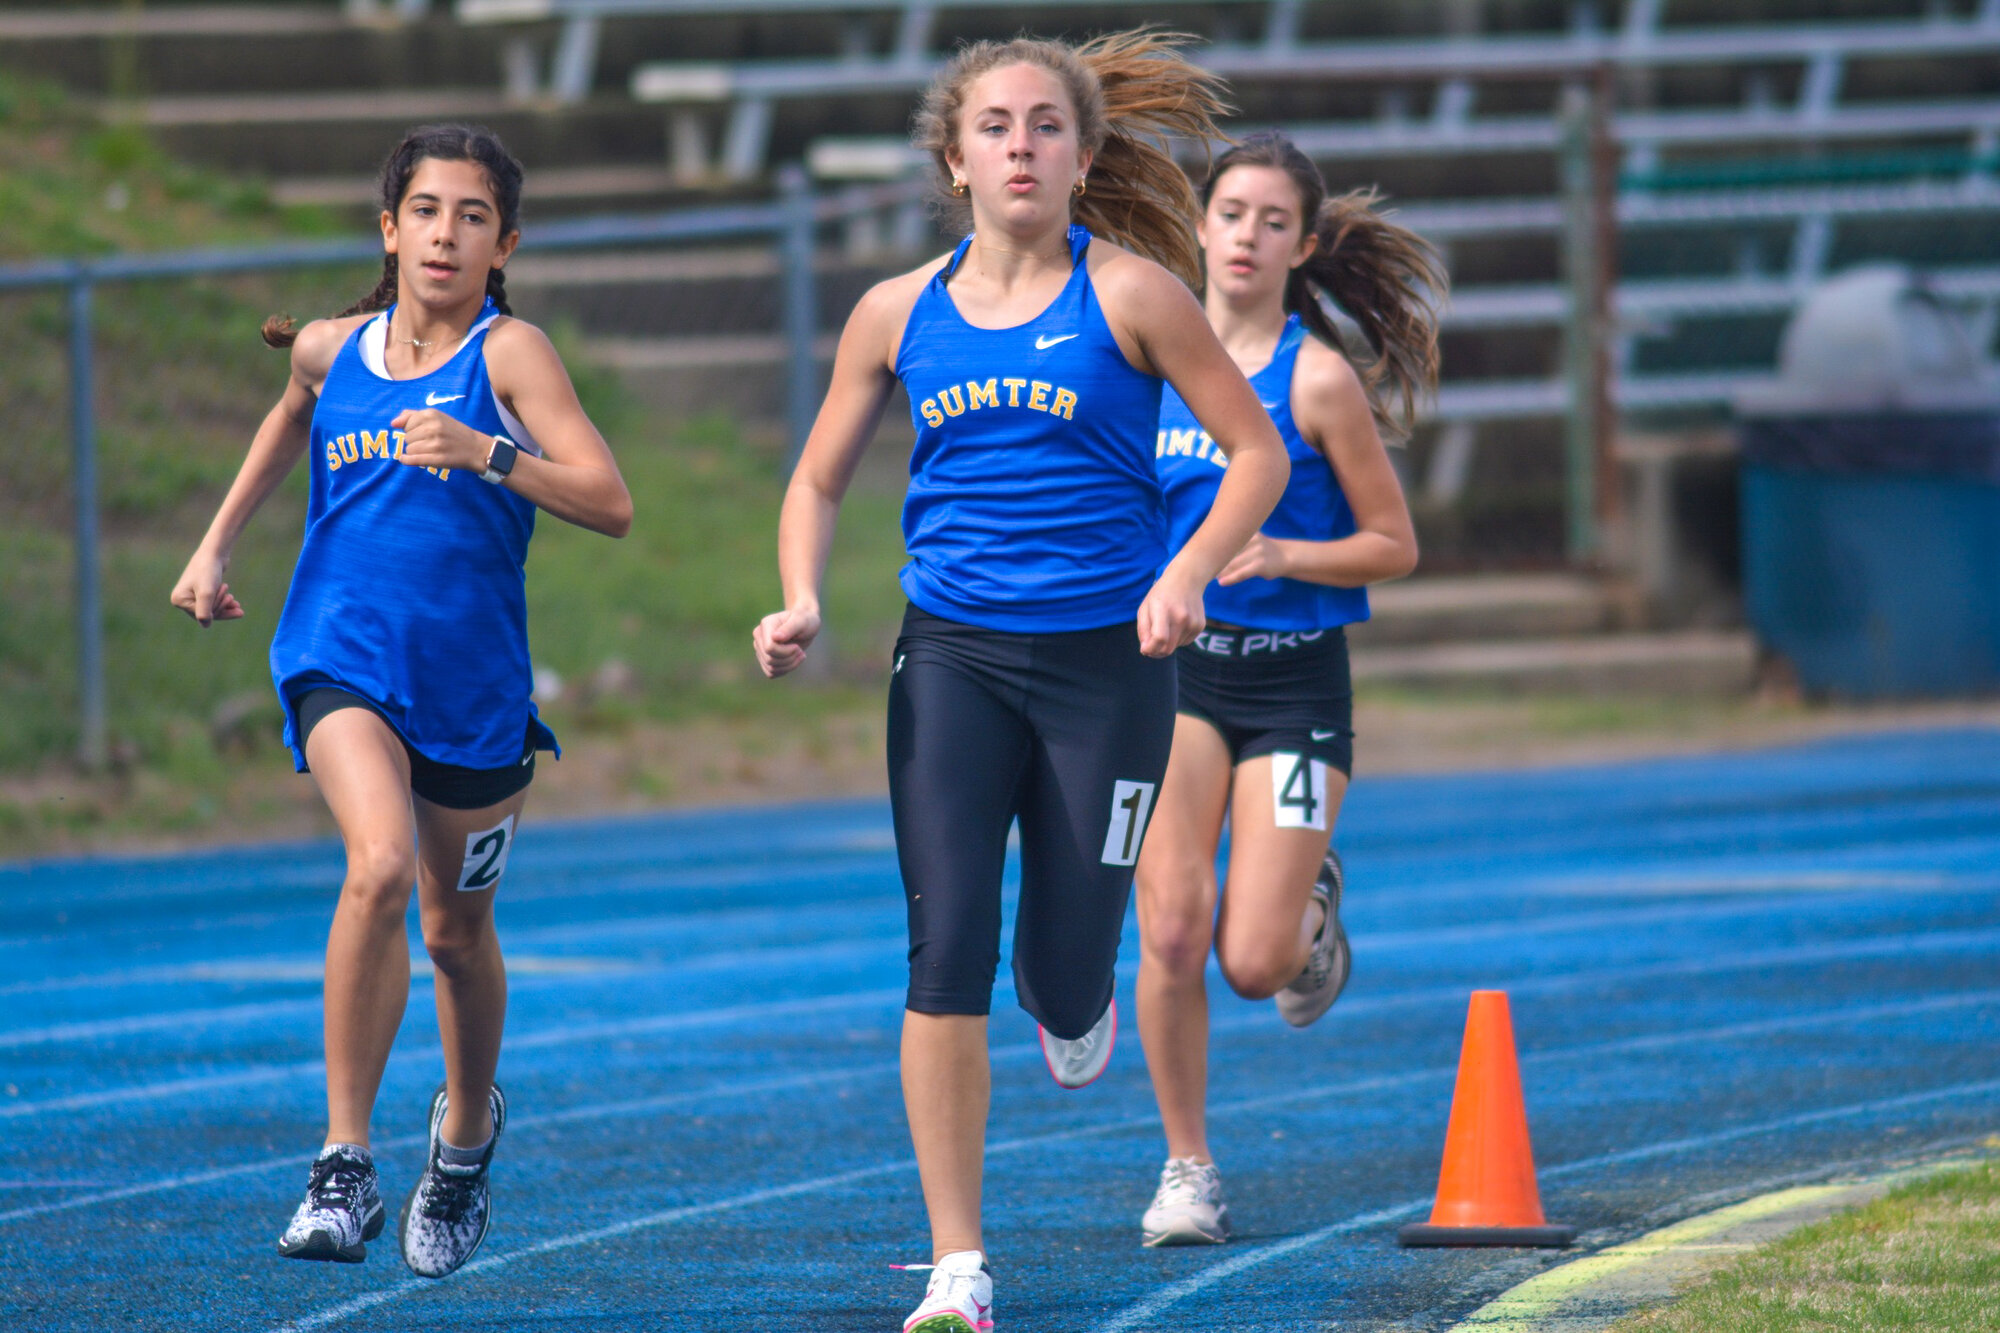 Sumter High's Molly Smith, left, and Emily Vipperman, center, both had top 15 finishes in both the 1,600m and 3,200m runs at the Bob Jenkins Coaches Classic on Saturday, March 23.